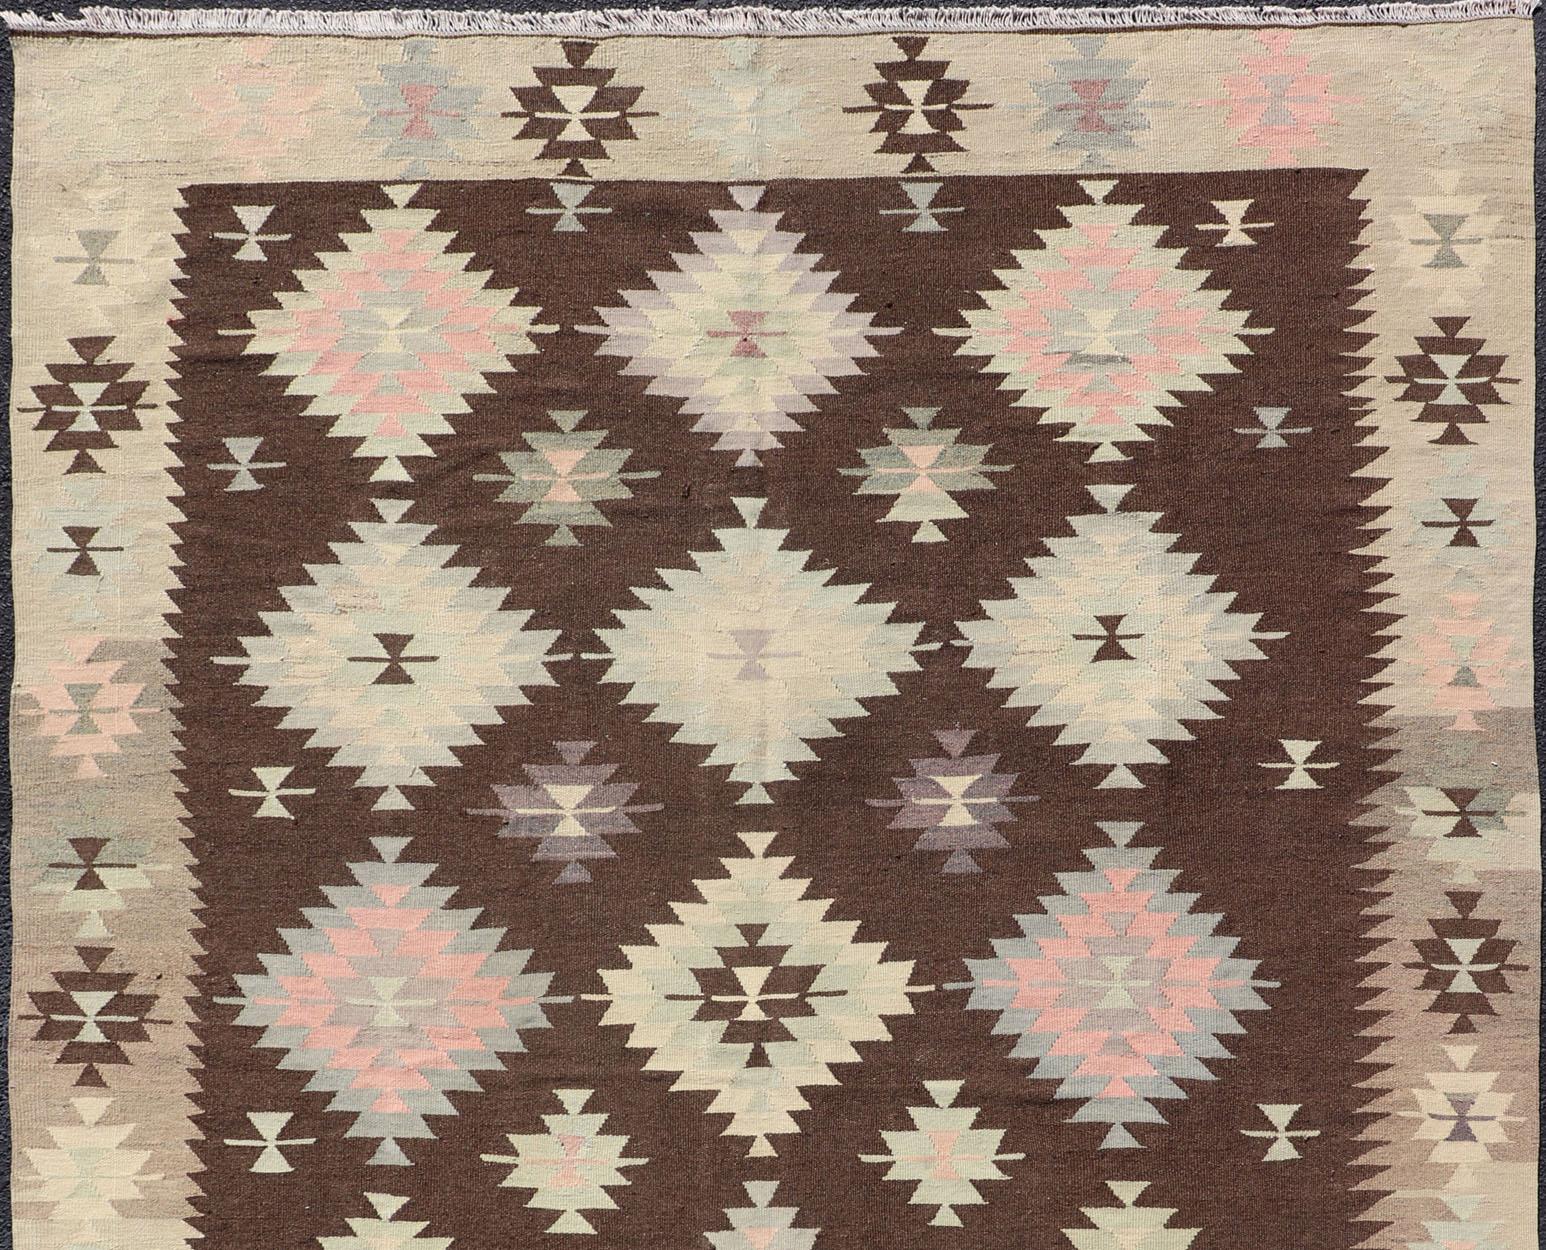 Turkish Kilim vintage in dark brown background and cream with graphic tribal design, Keivan Woven Arts rug/TU-NED-1009, country of origin / type: Turkey / Kilim, circa 1950.

Measures: 6'5 x 9'4

This unique Turkish Kilim features a graphic